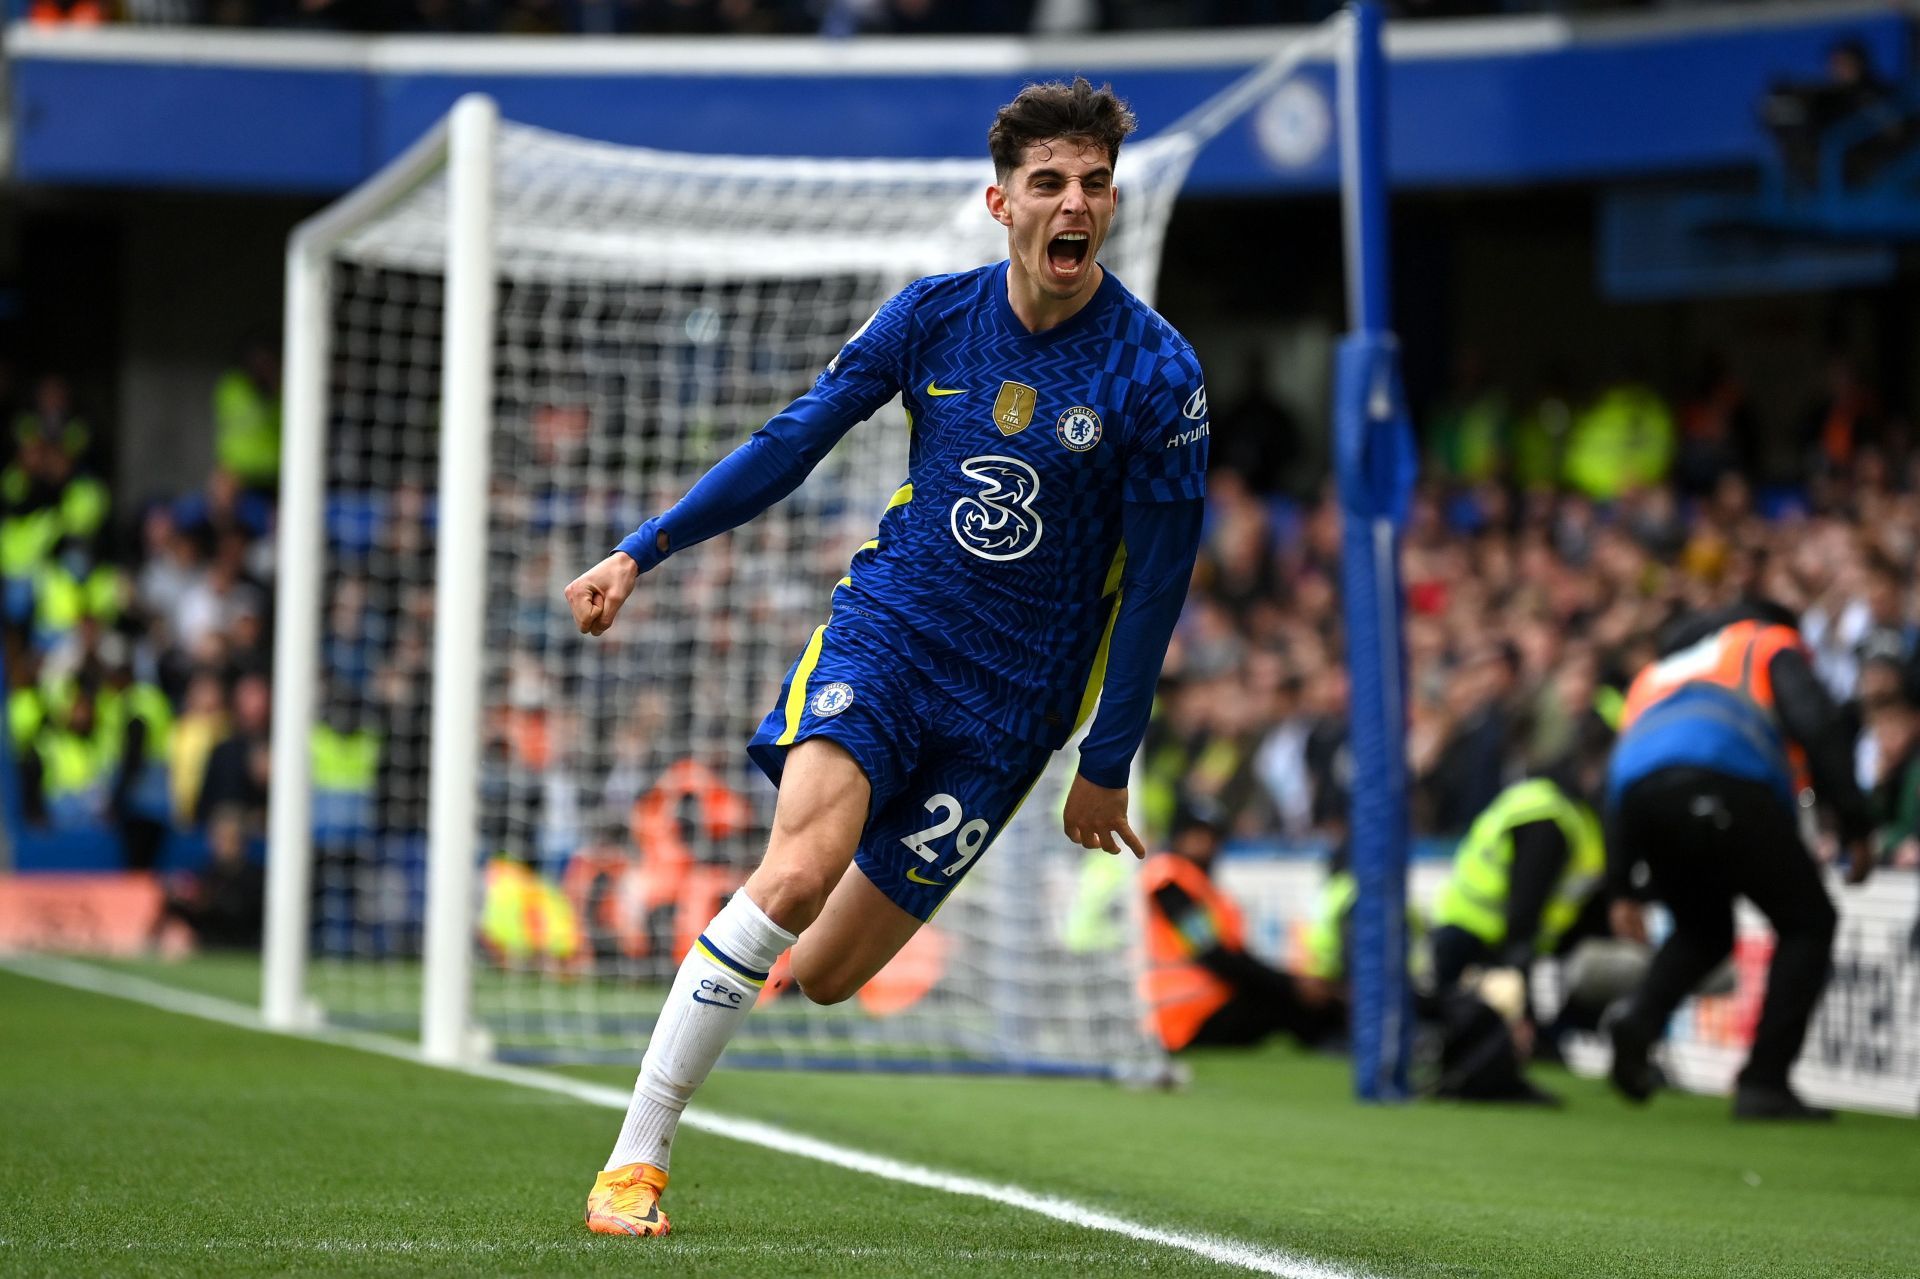 Havertz secured all three points for the Blues against Newcastle